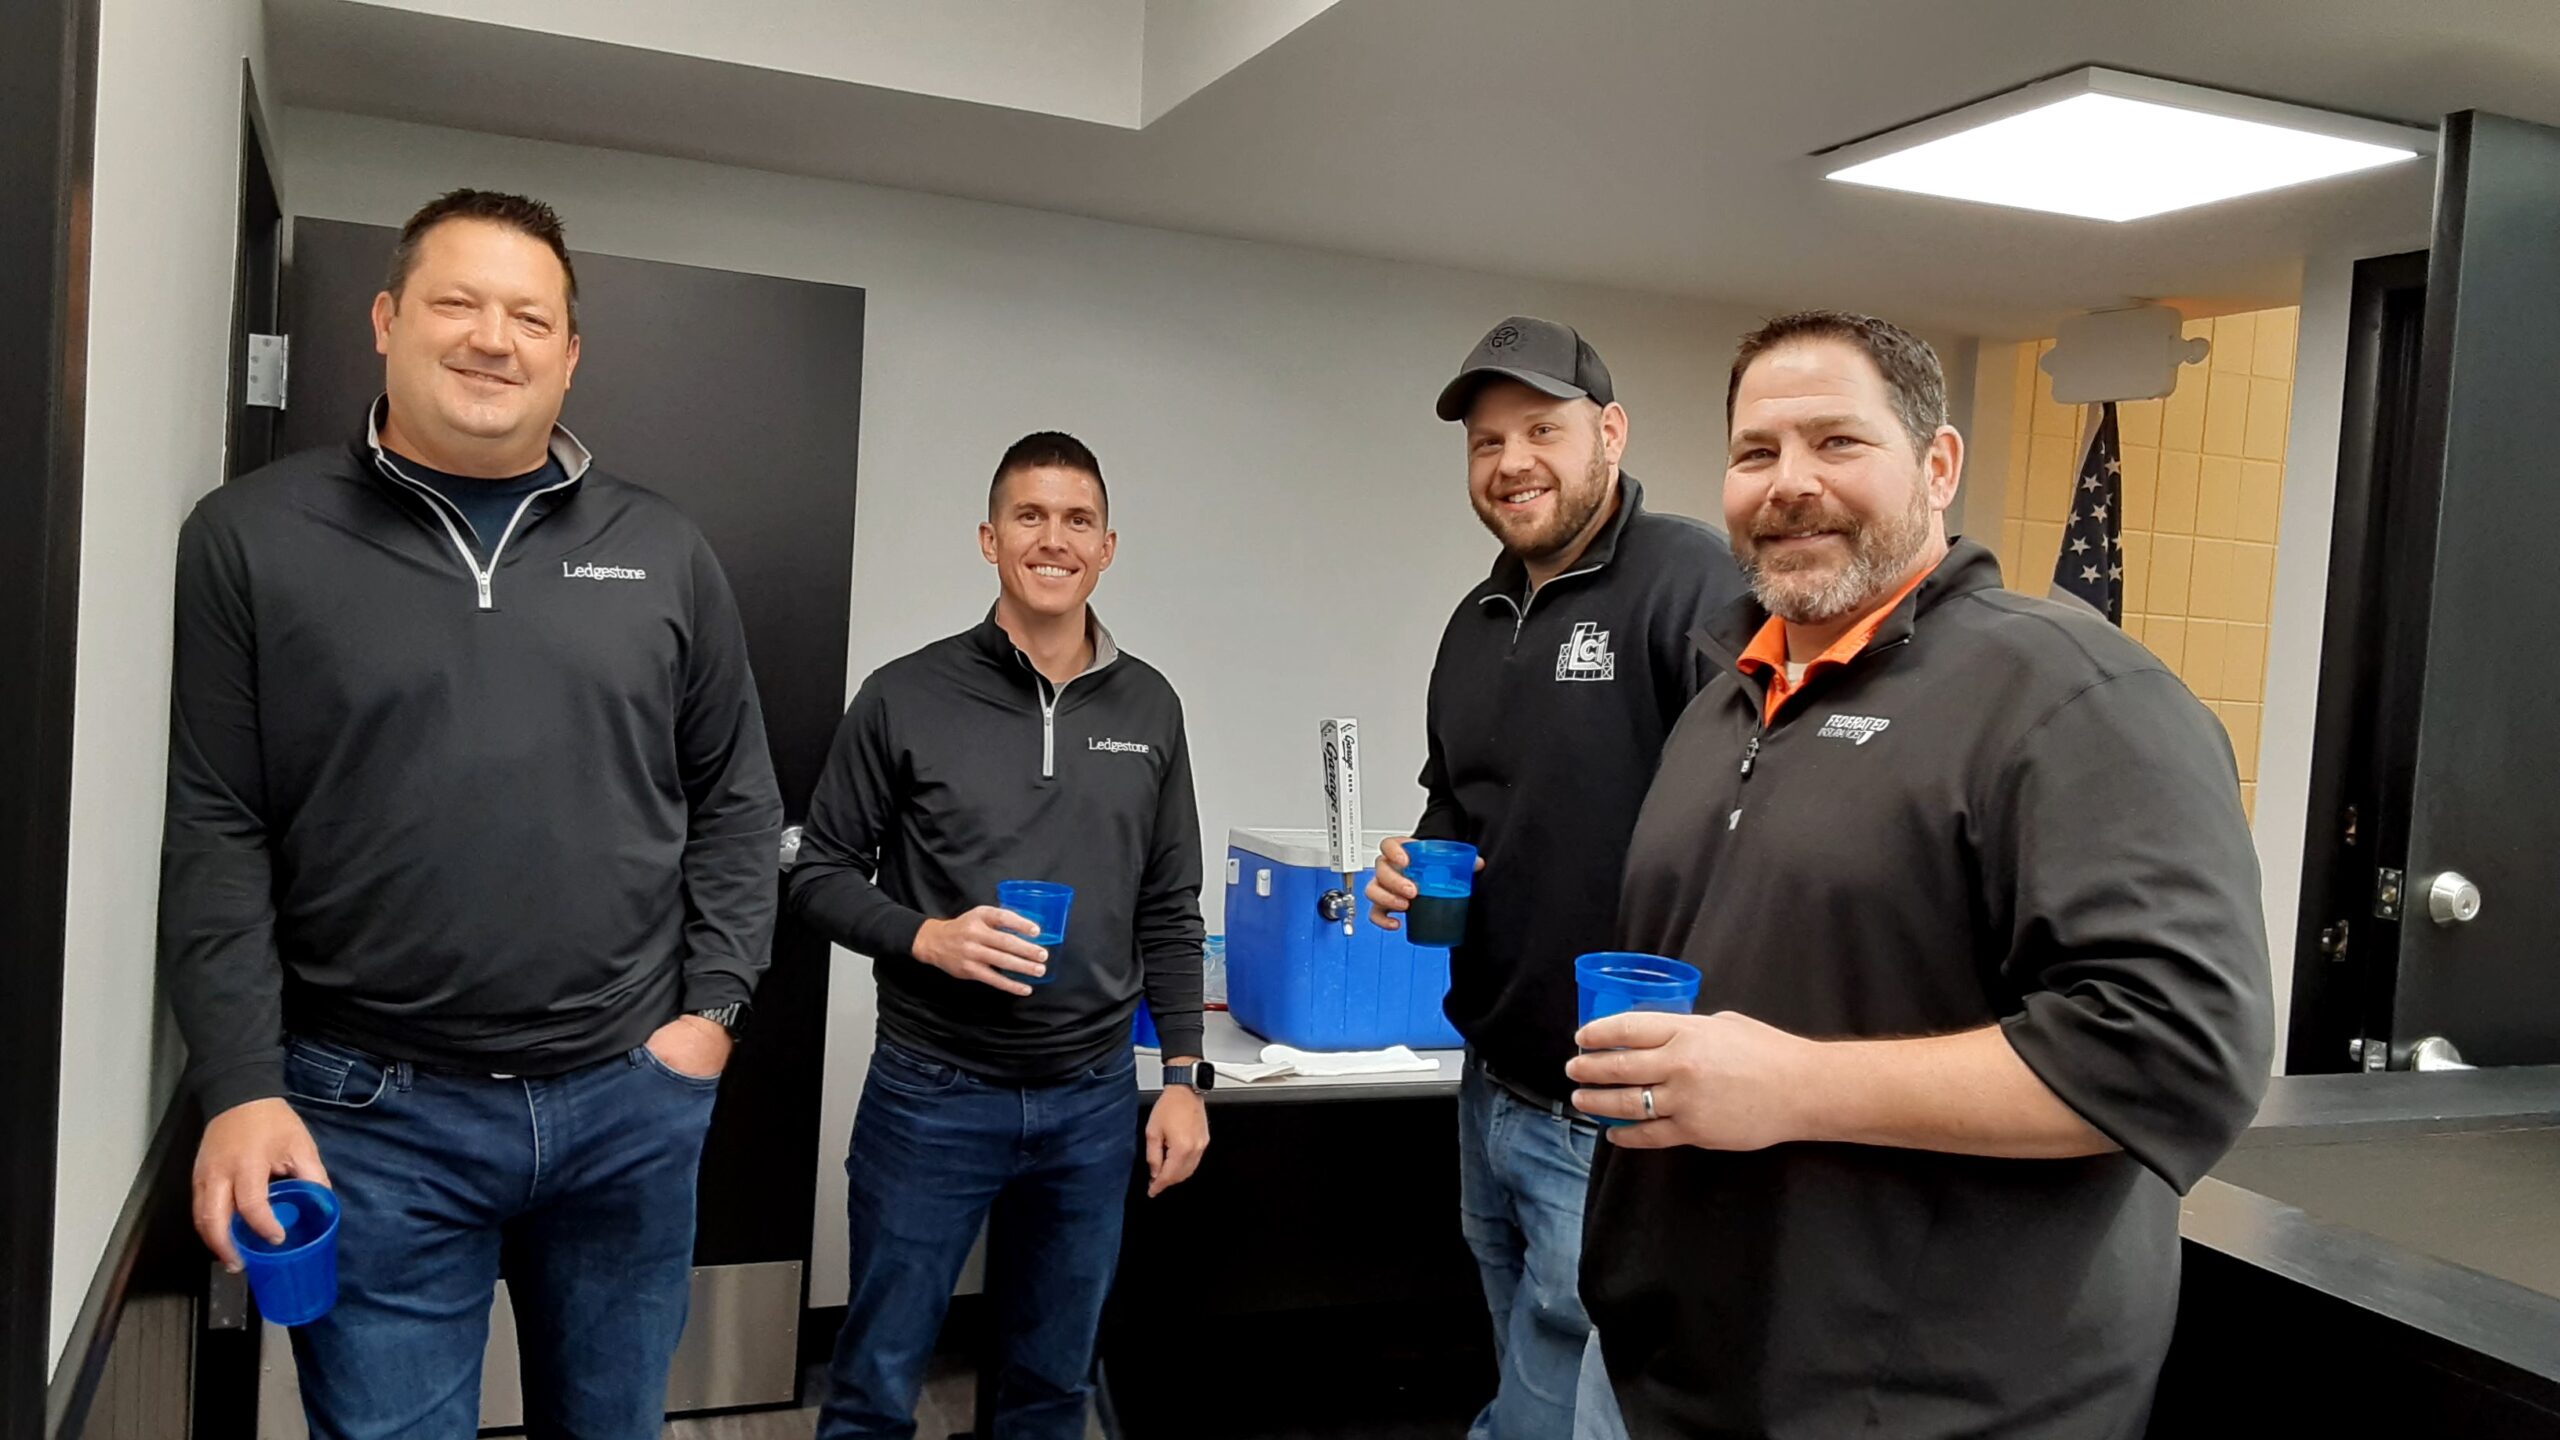 Four men standing in a room holding blue cups.